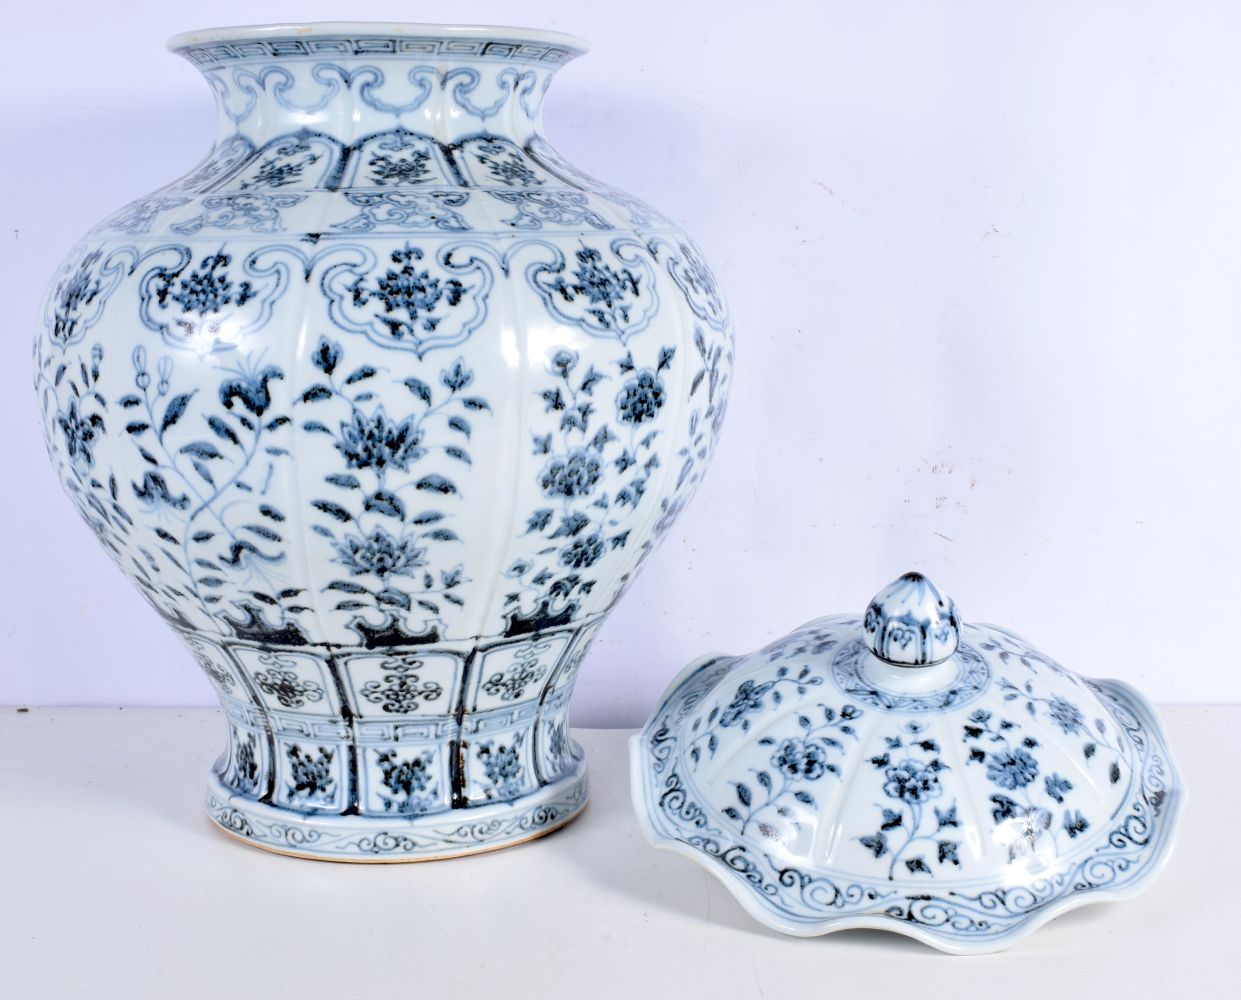 A large Chinese Porcelain blue and white Jar with cover decorative with a floral pattern 55 cm - Image 5 of 6